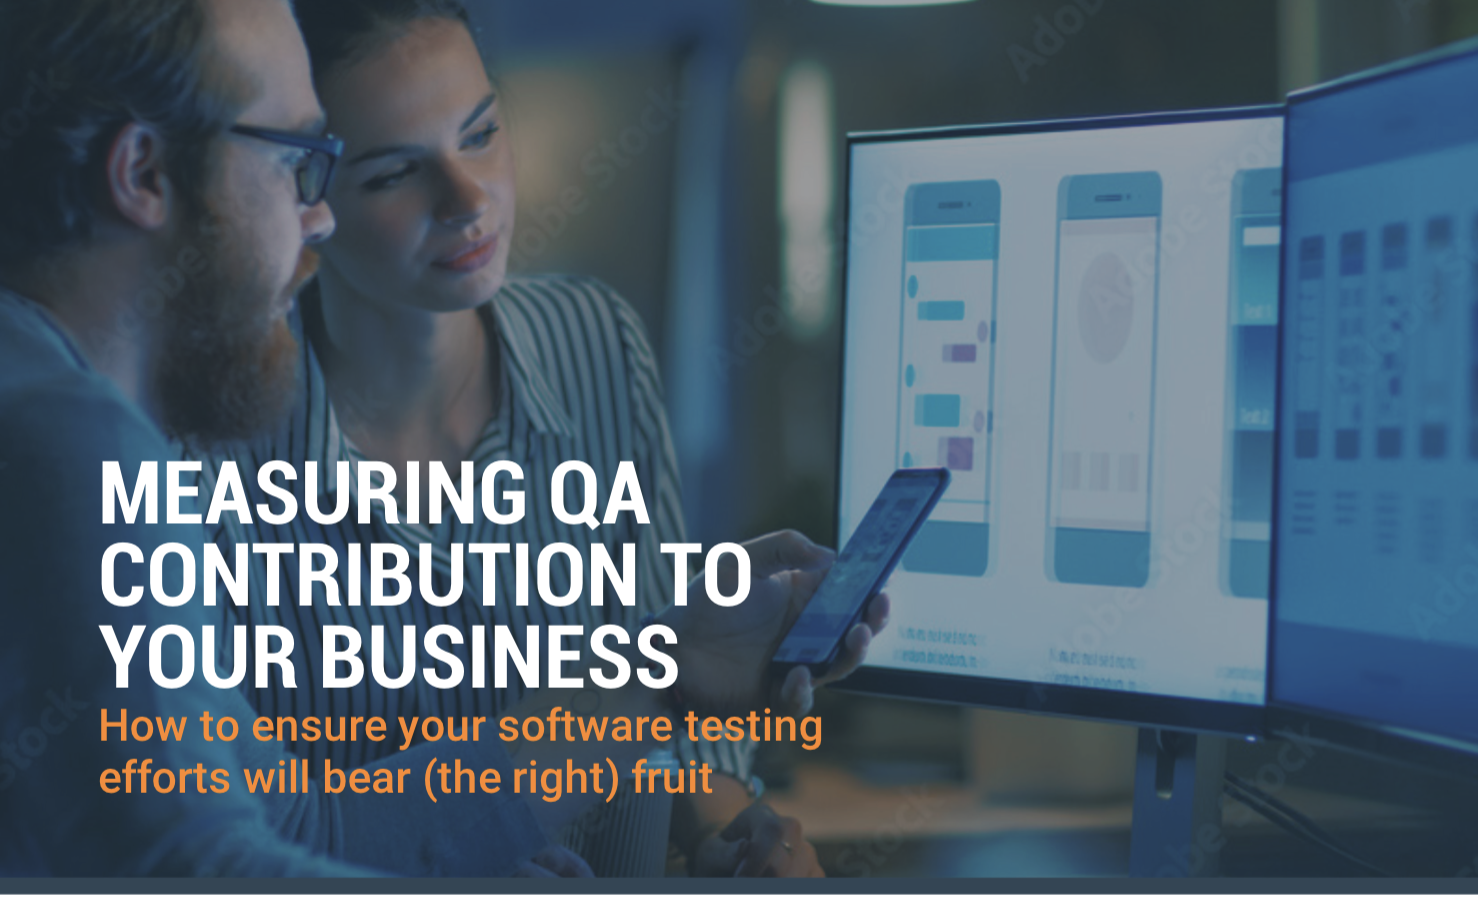 Measuring QA Contribution to Your Business